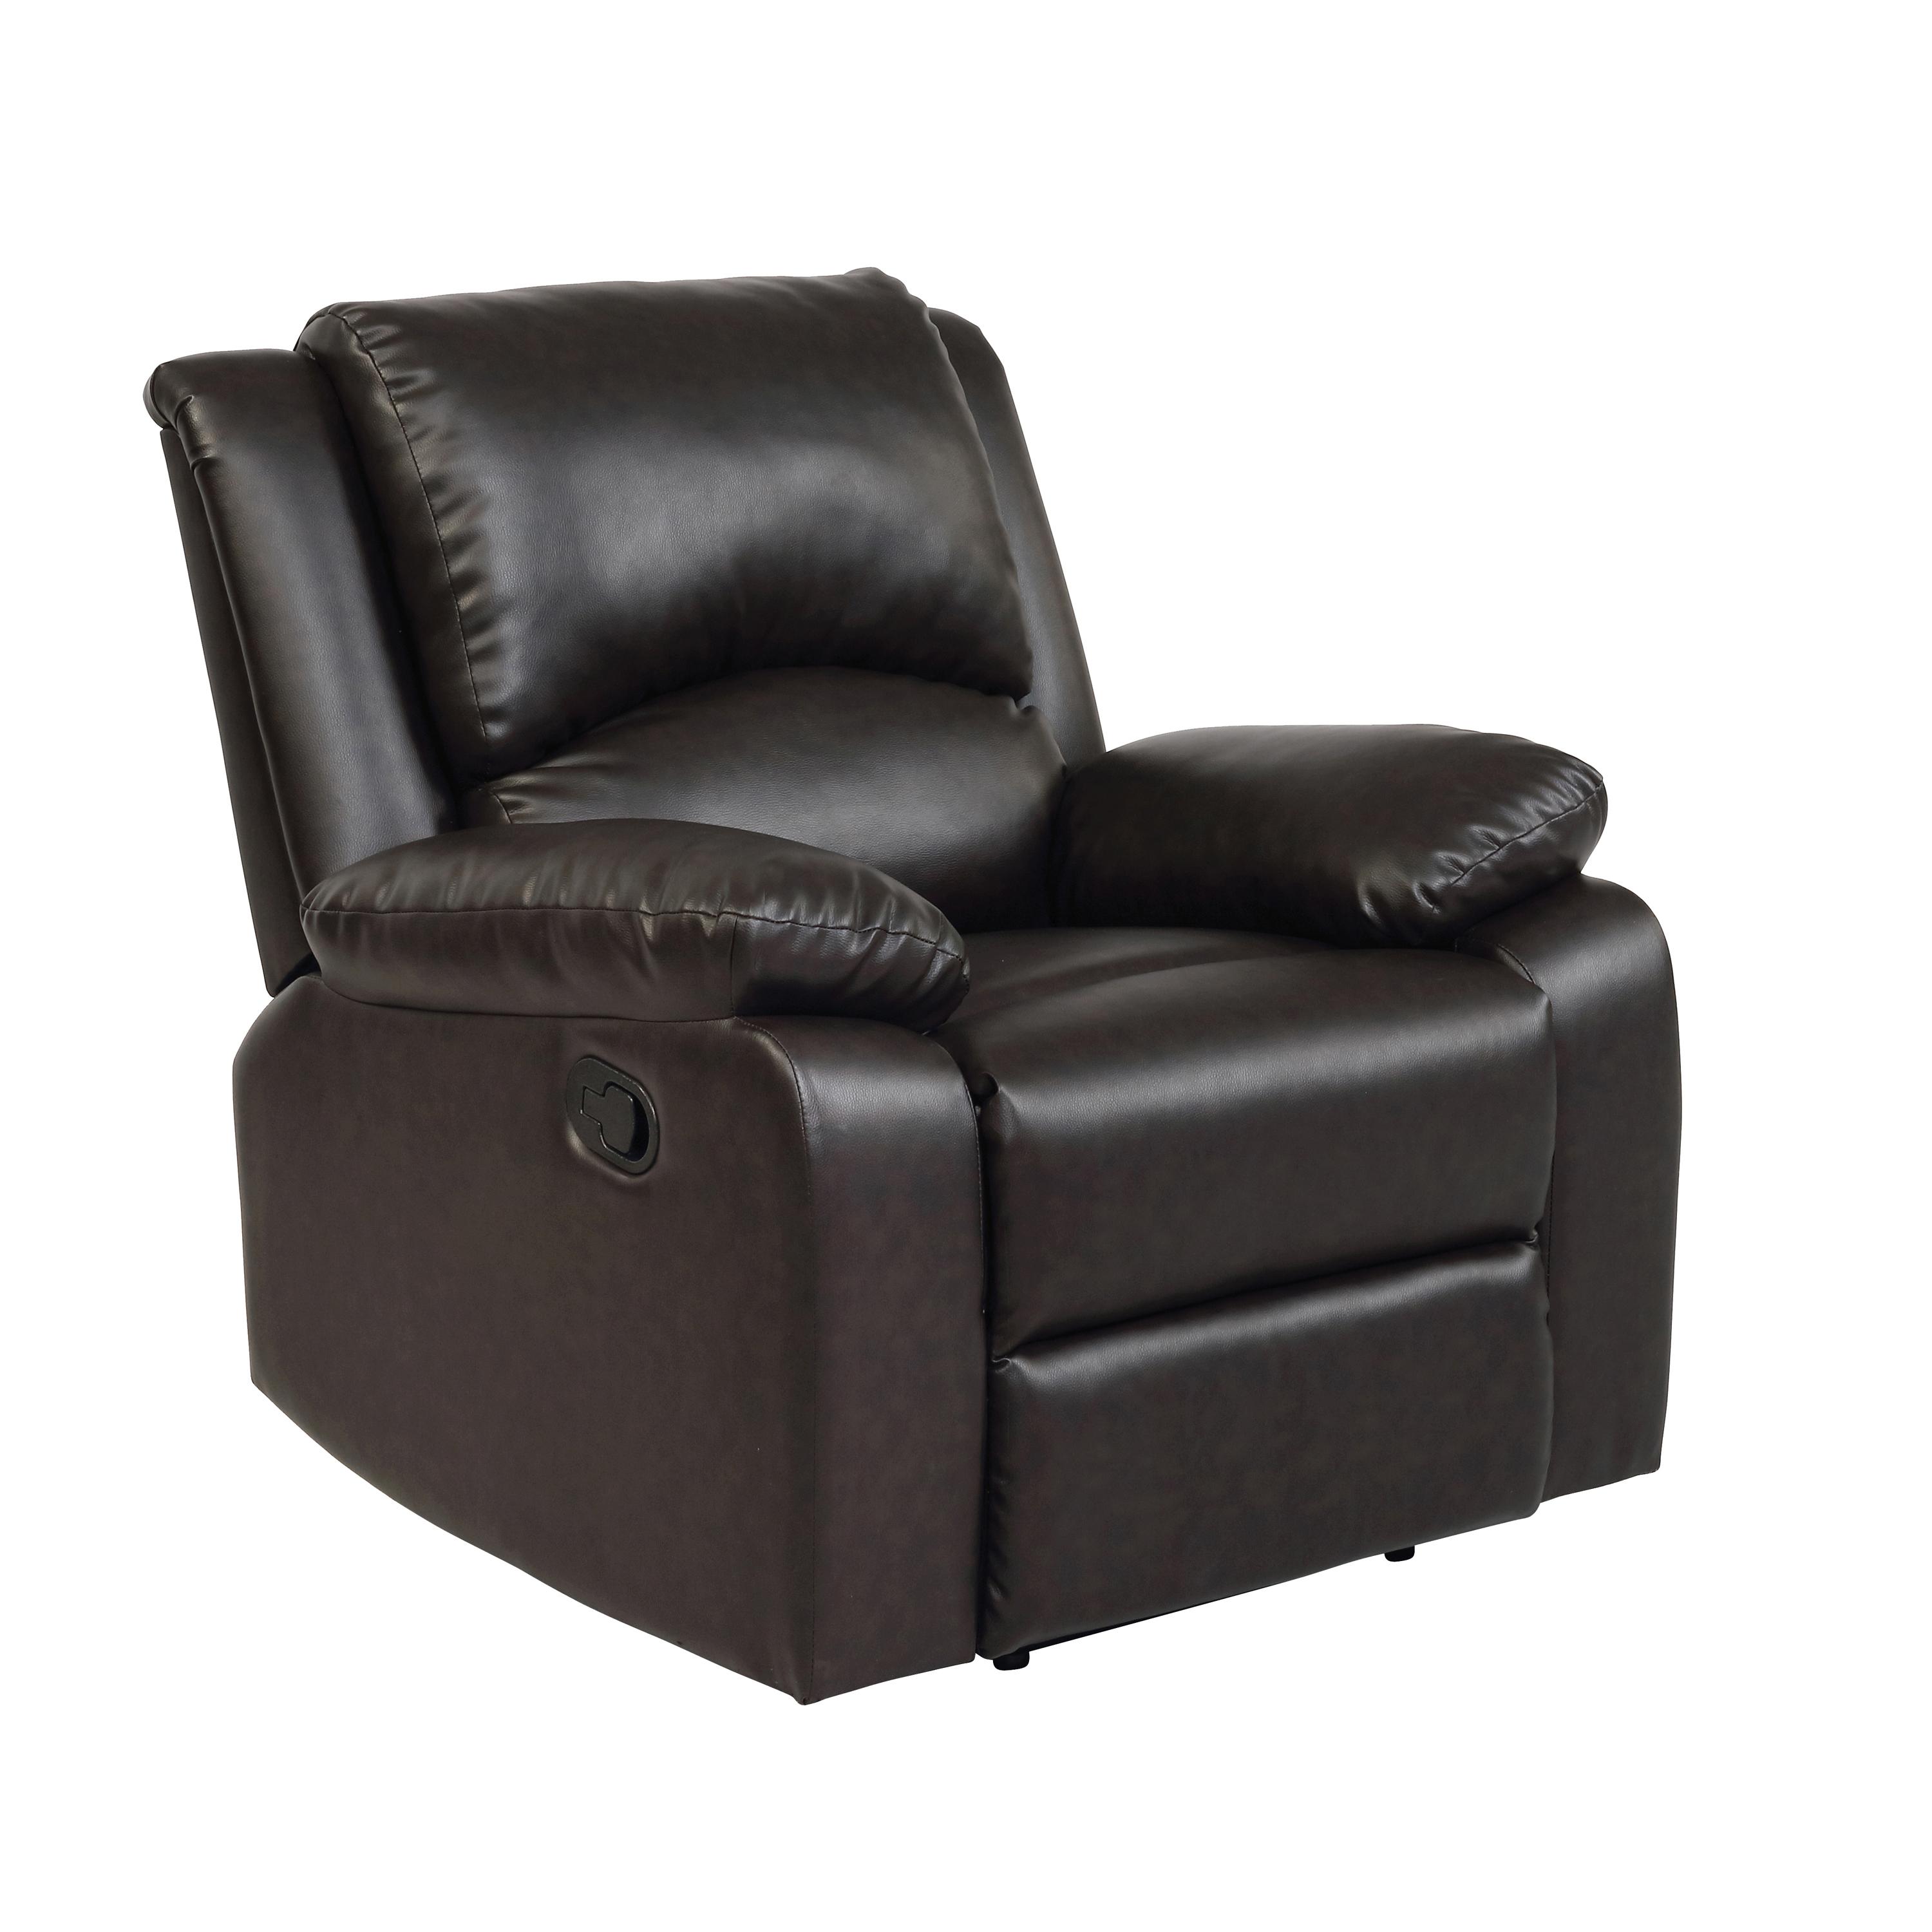 

    
Transitional Two-tone Brown Leatherette Recliner Coaster 600973 Boston
